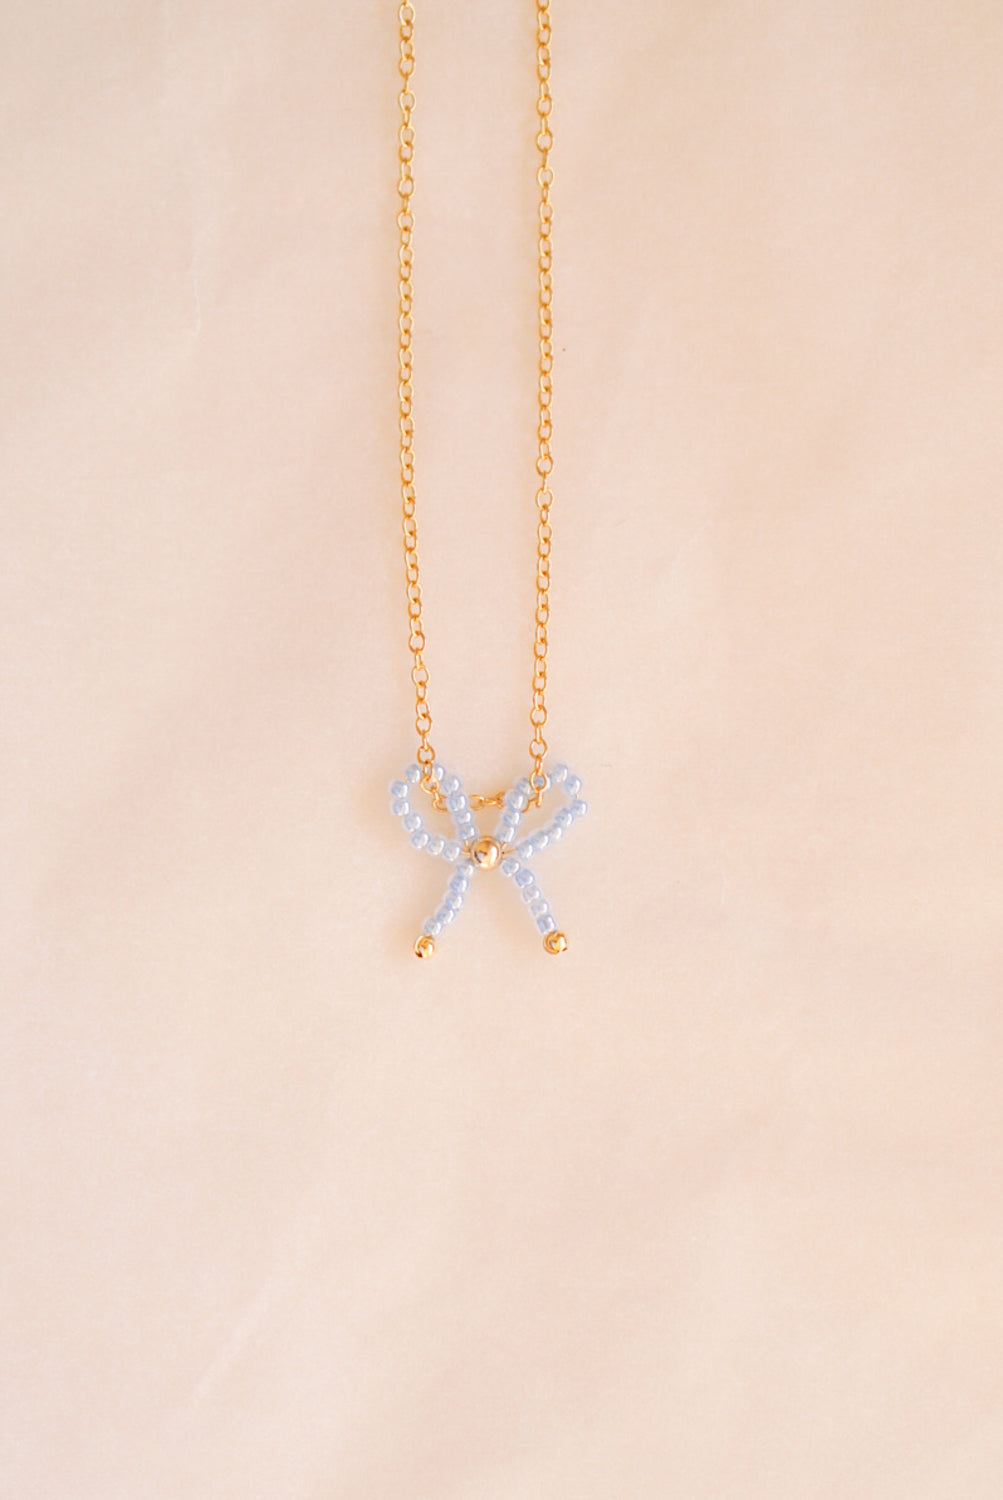 Mini BOW - icy baby blue